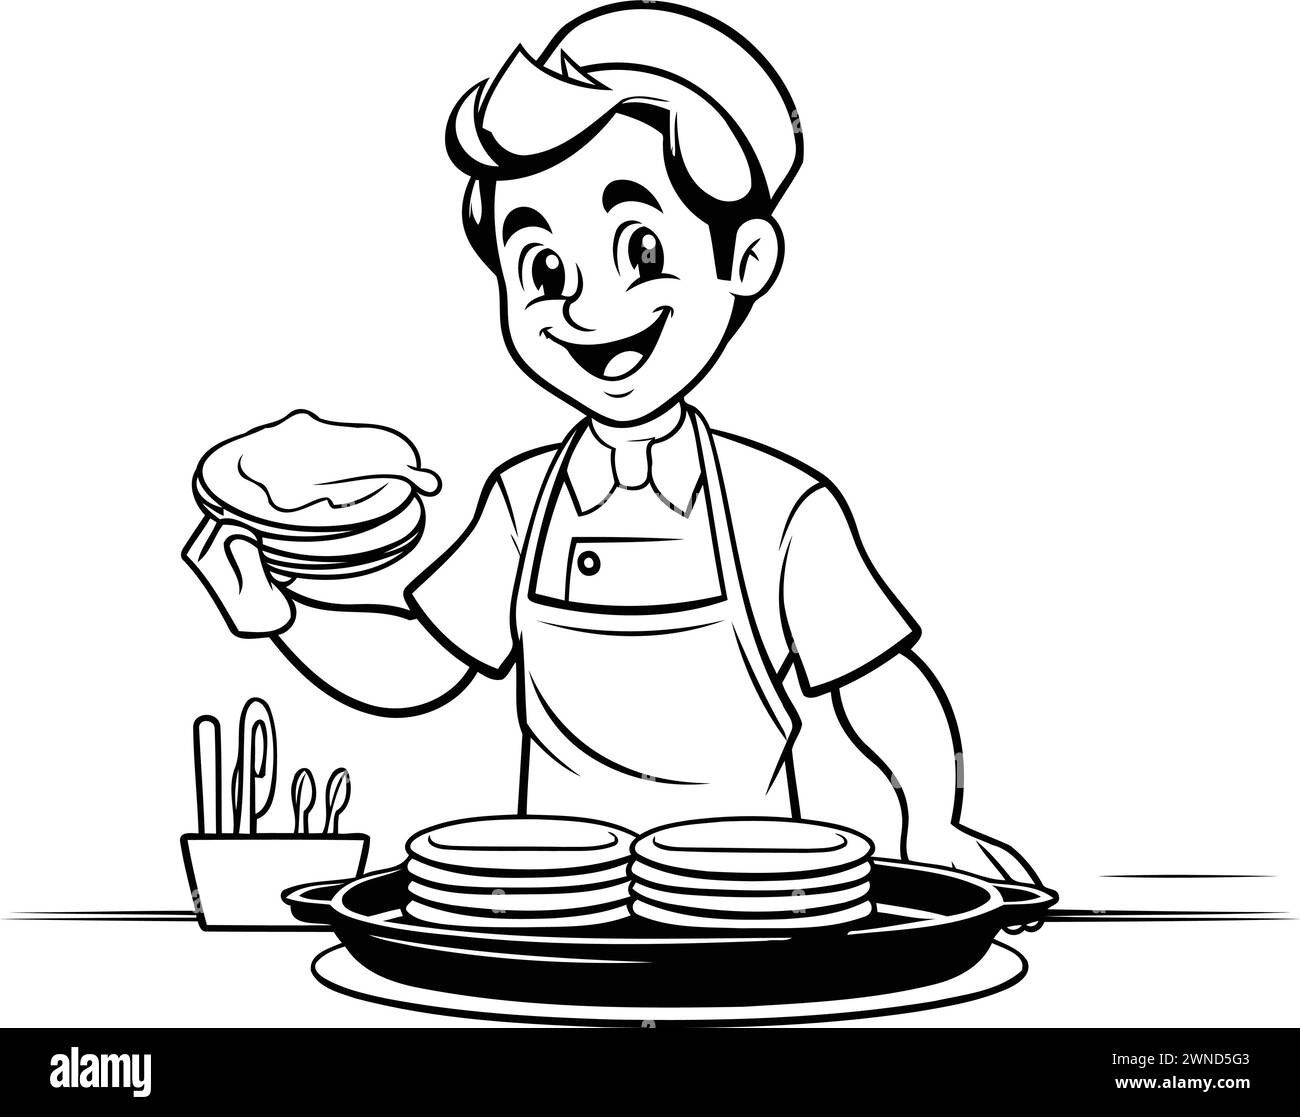 Cartoon chef with pancakes. Black and white vector illustration for coloring book. Stock Vector